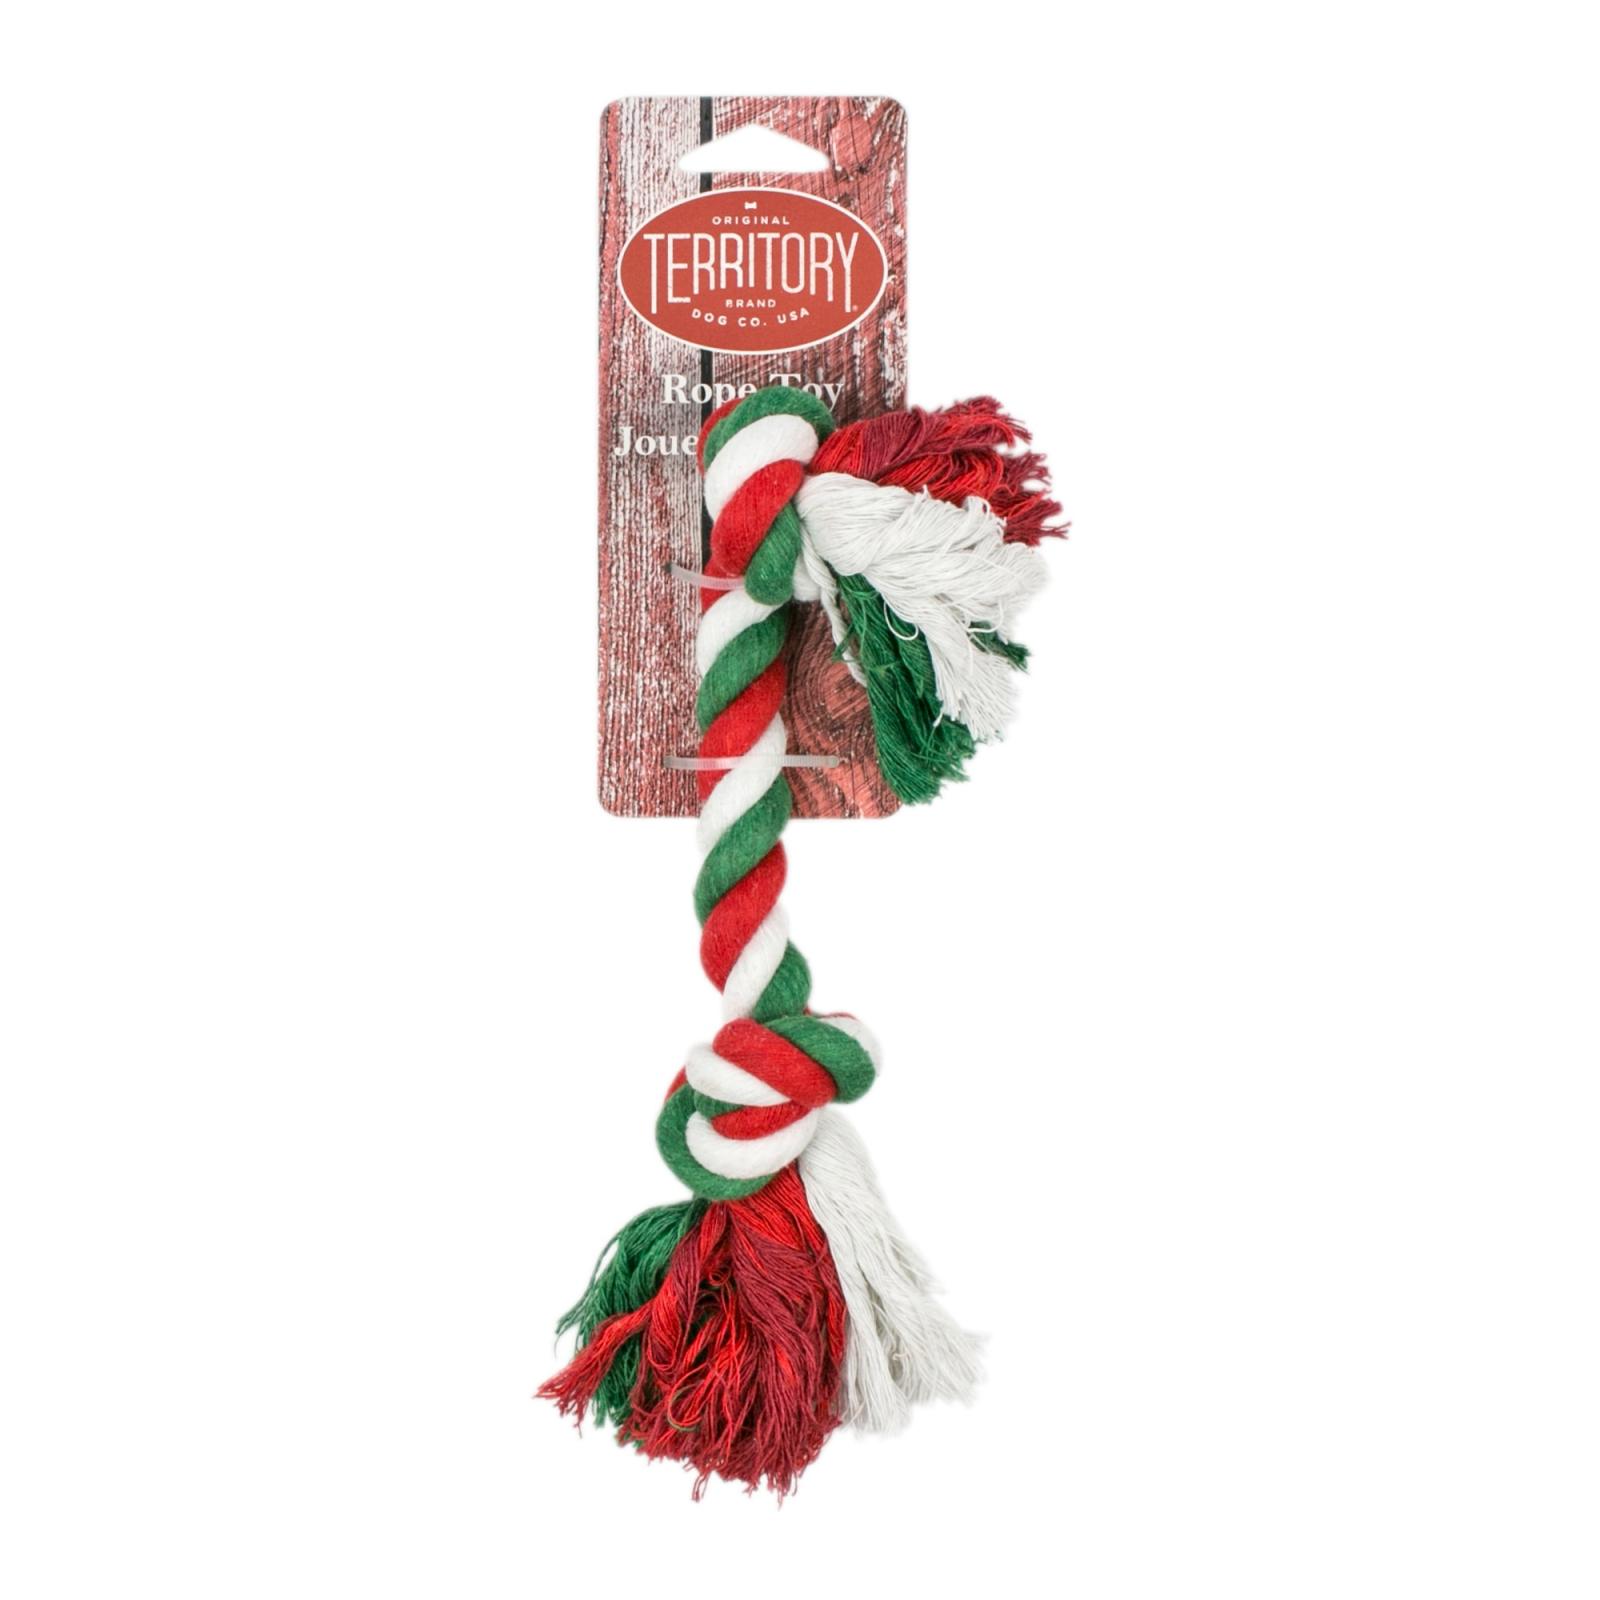 Original Territory Candy Cane Rope Dog Toy